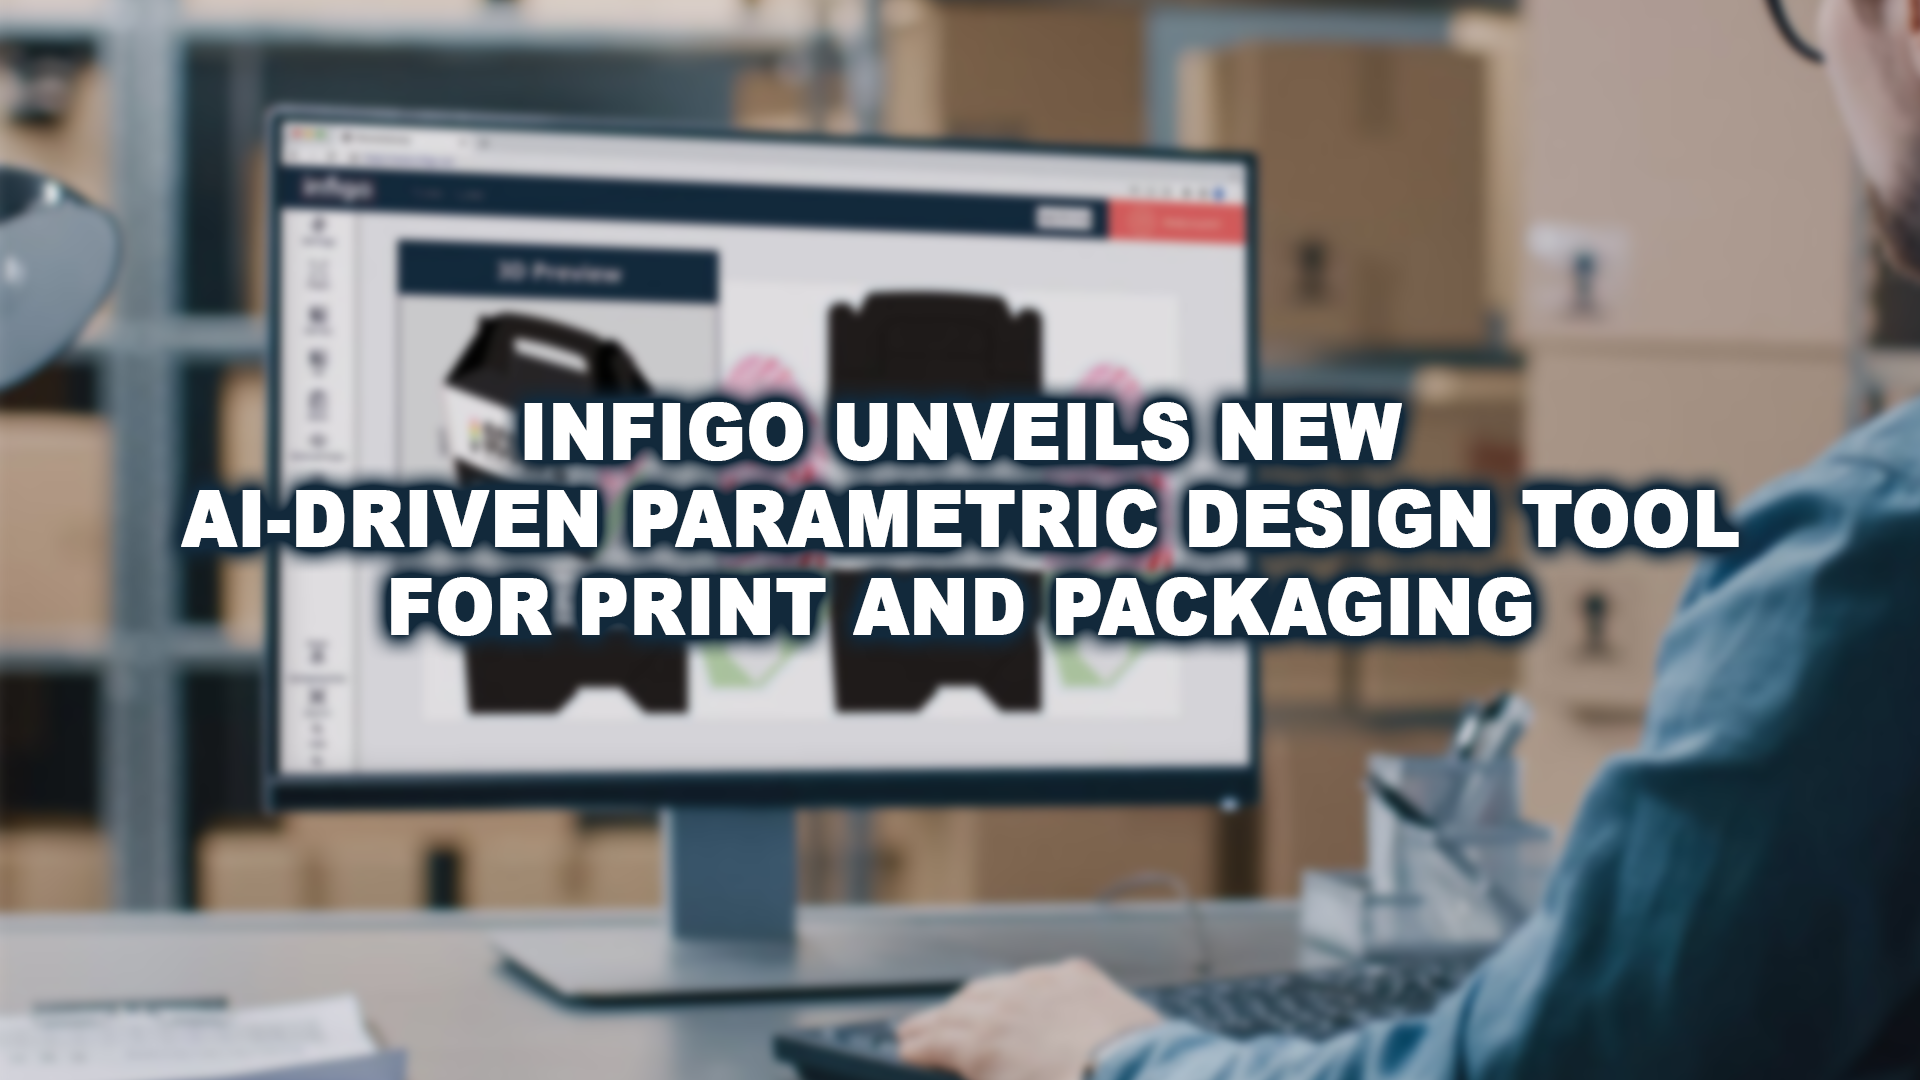 Xxx Nxl - Infigo unveils new AI-driven parametric design tool for print and packaging  - Graphic Arts Media